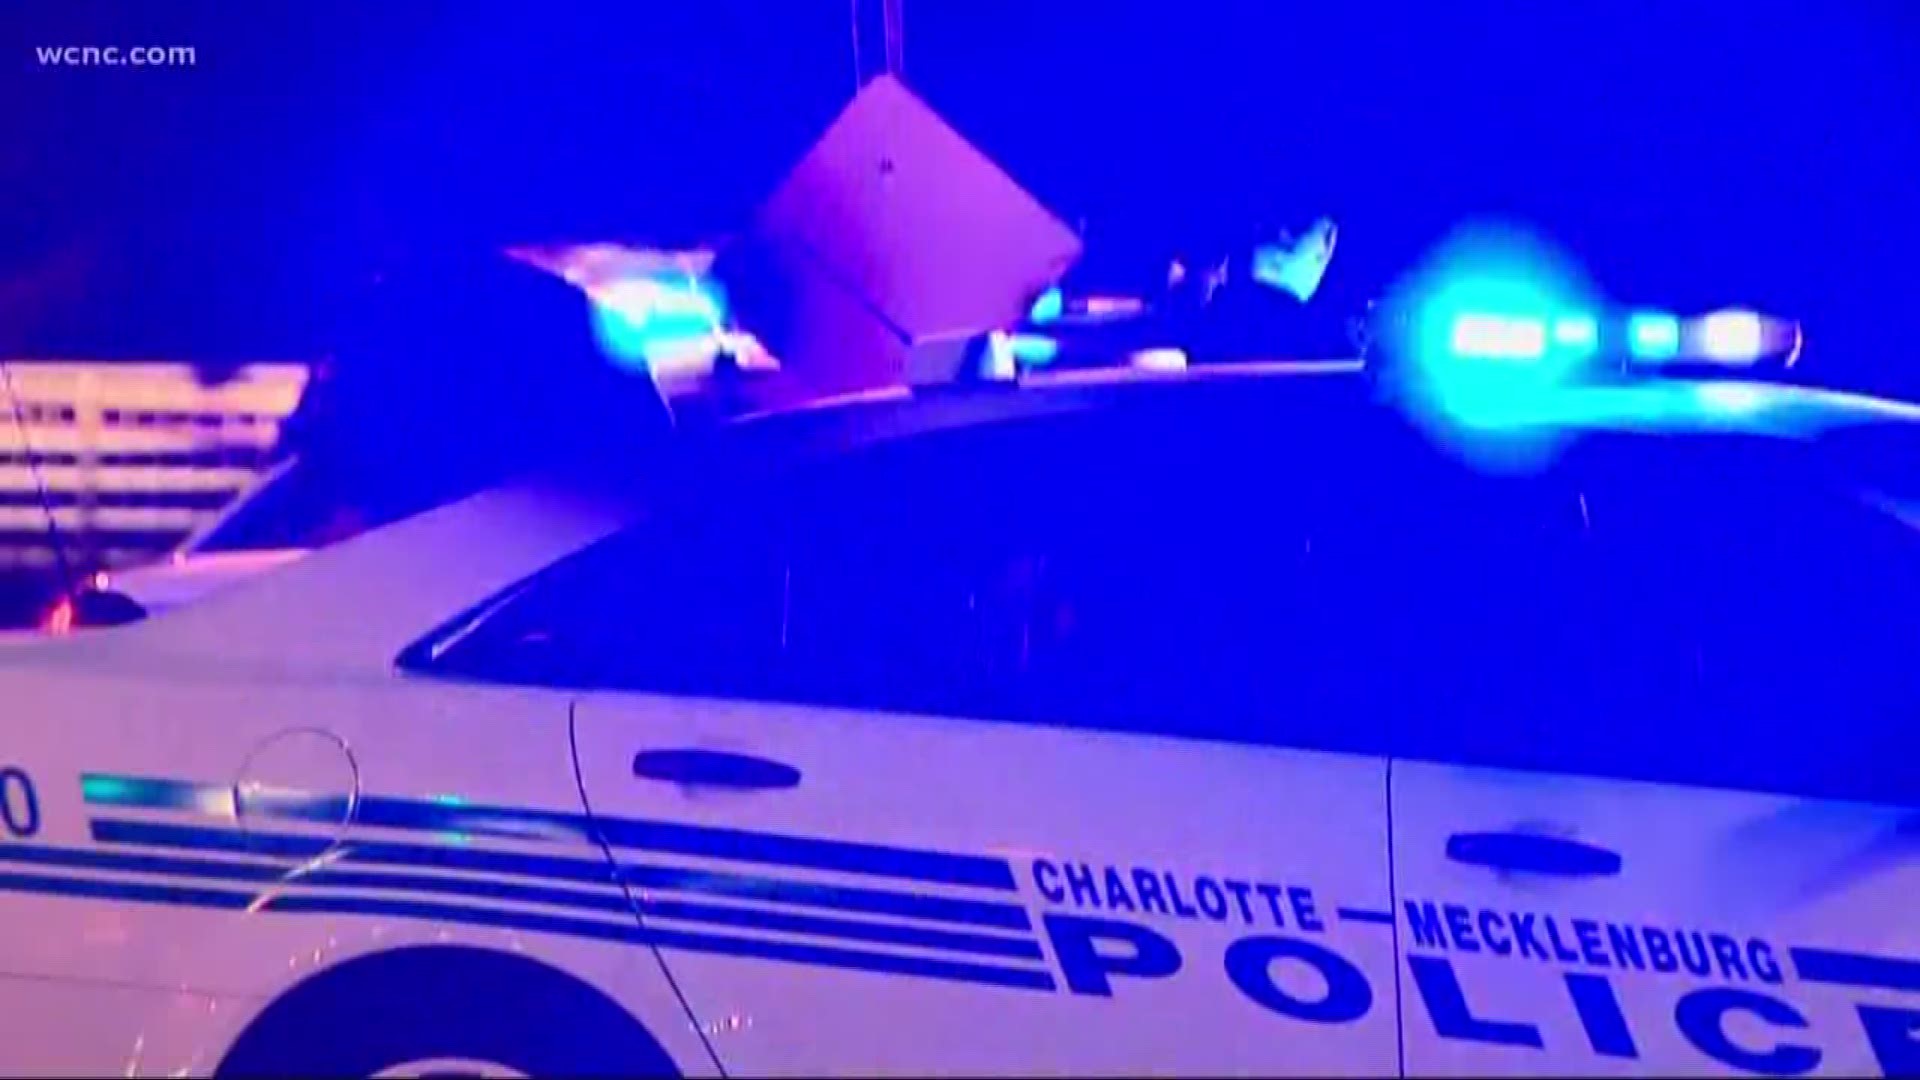 A Charlotte Mecklenburg Police officer that was charged in July with misdemeanor death by vehicle after hitting and killing a pedestrian while on duty has been indicted by a grand jury for involuntary manslaughter.